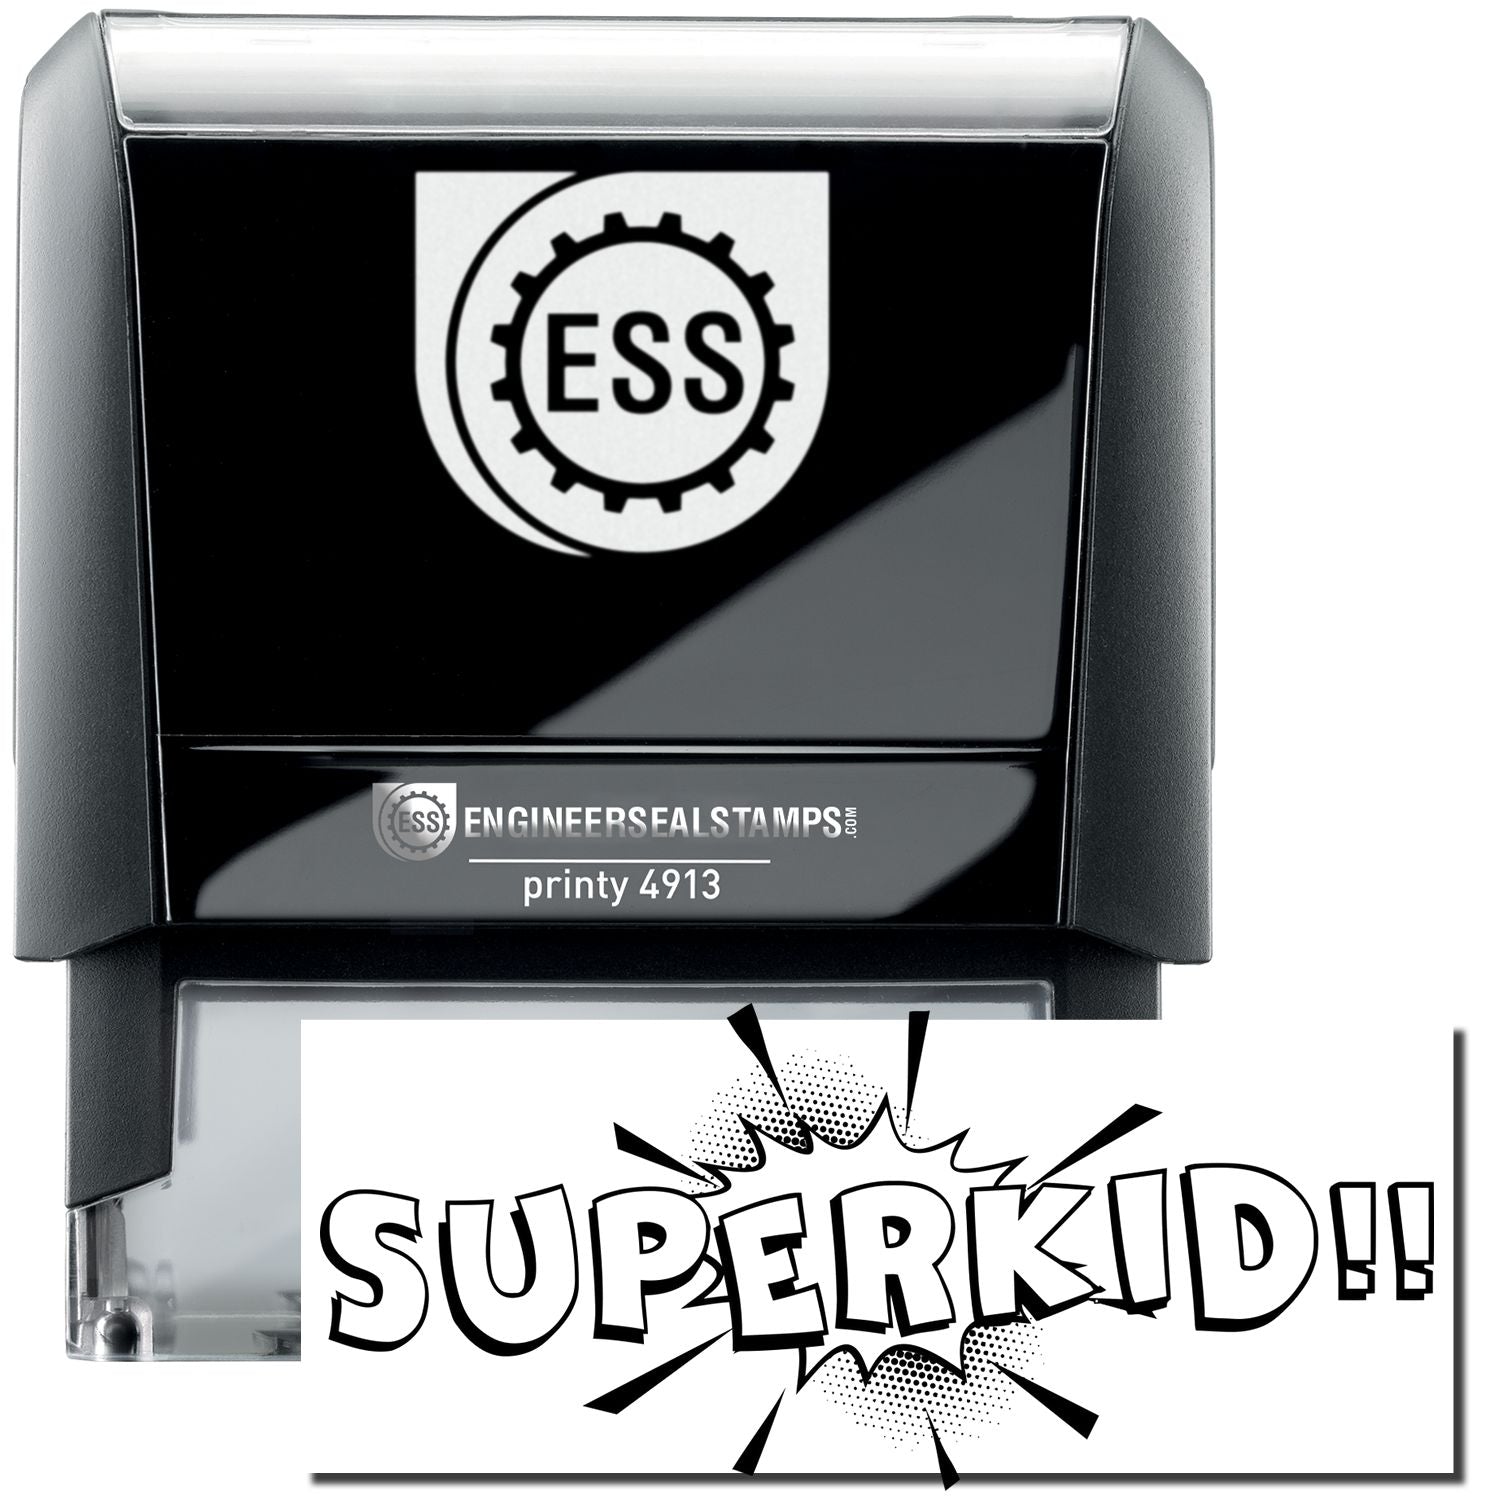 A self-inking stamp with a stamped image showing how the text "SUPERKID!!" in a large bold urban font and a background that seems like it came out of comic book pages is displayed after stamping.